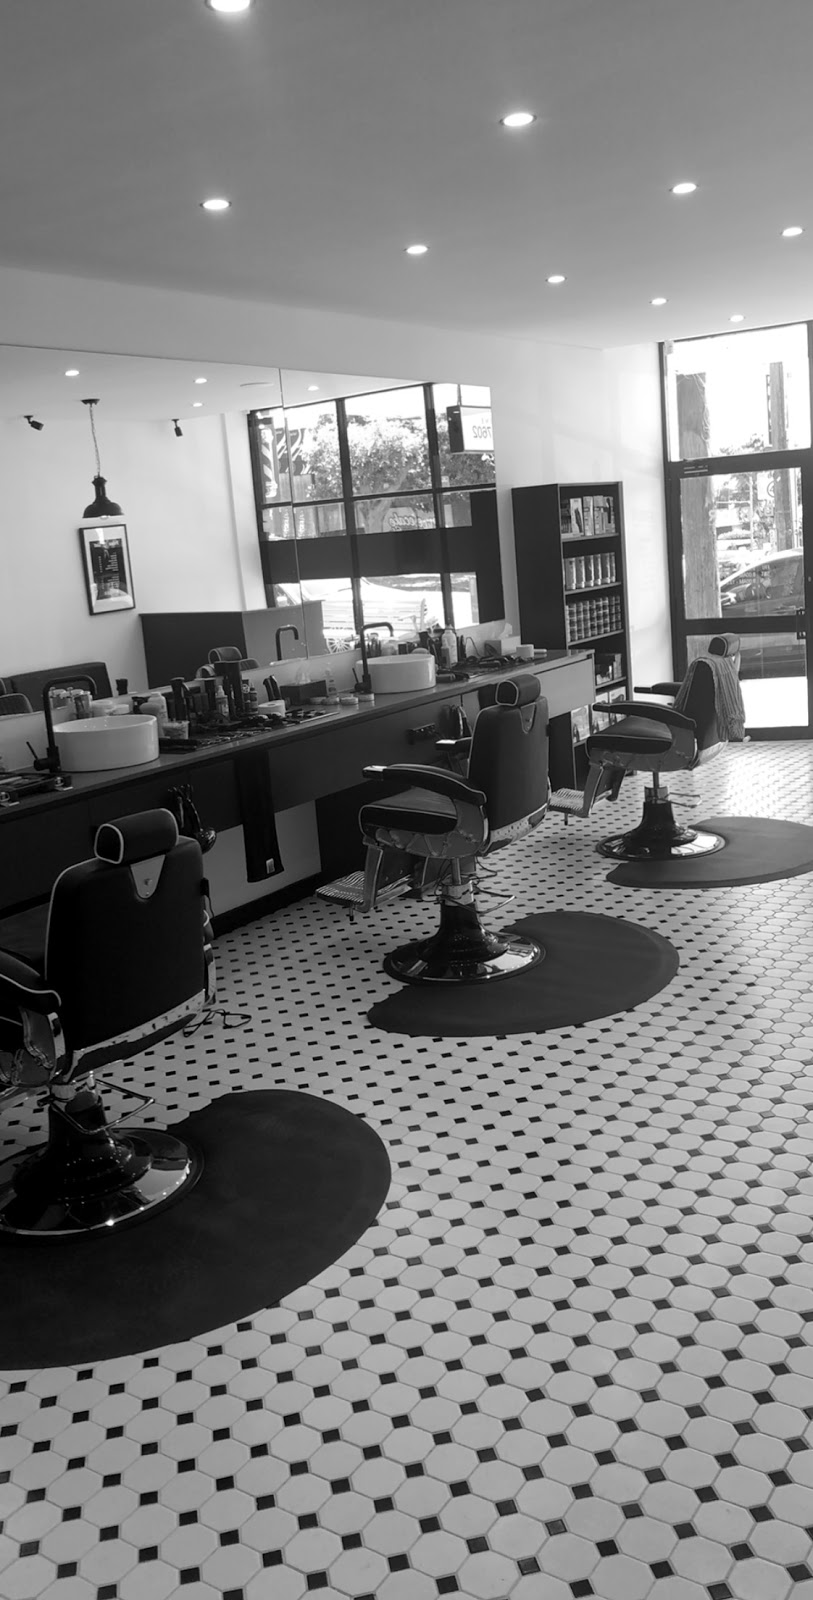 Barber squad | 128 Cahors Rd, Padstow NSW 2211, Australia | Phone: (02) 8772 7602